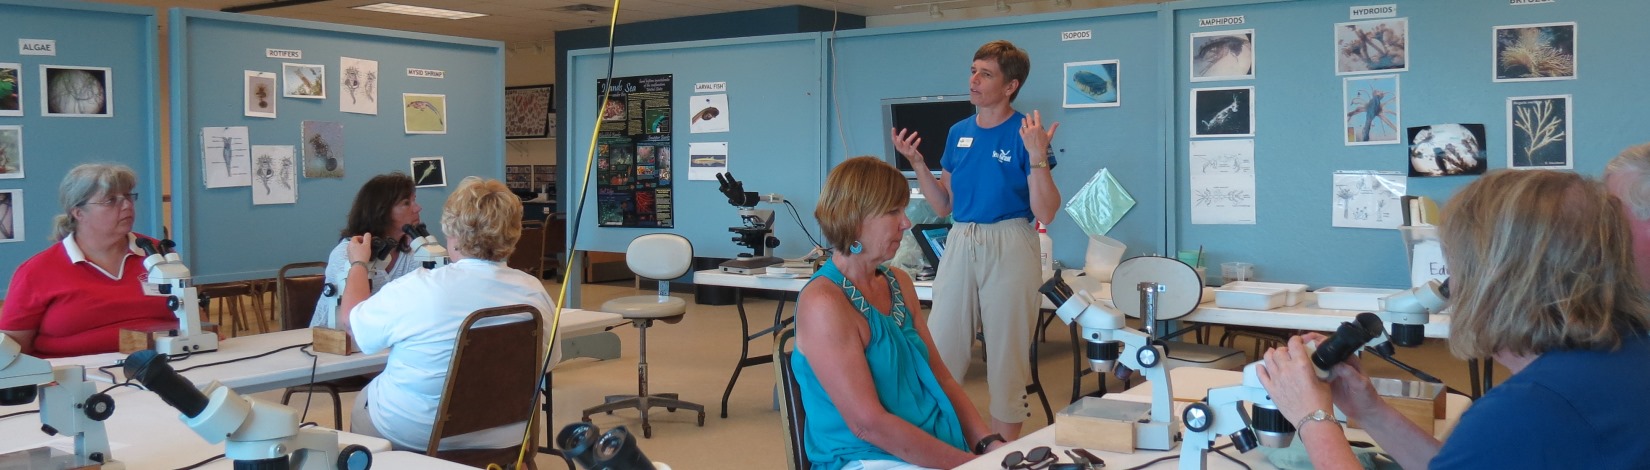 A teacher talking to adults who are seated at microscopes